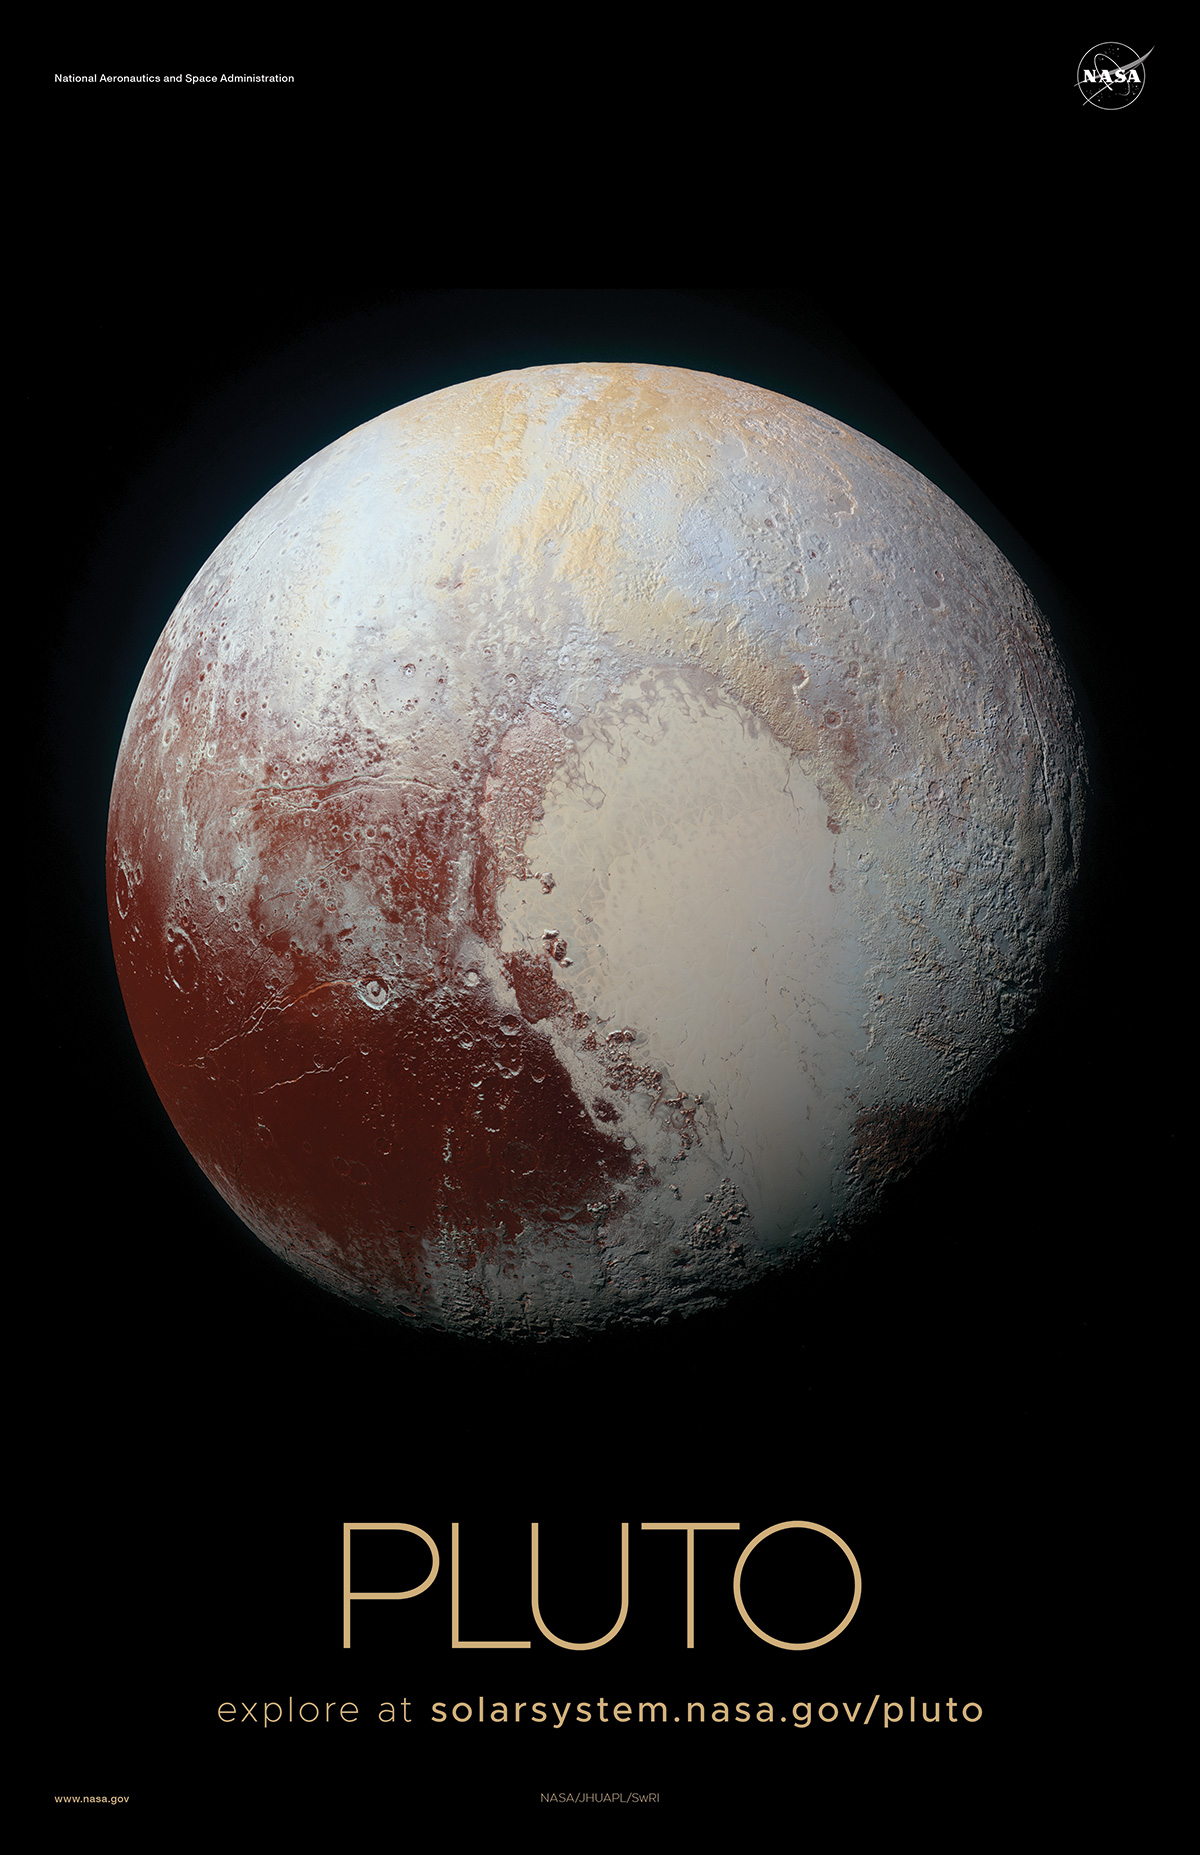 Color-enhanced view of Pluto that shows the heart-shaped region known as Sputnik Planitia.